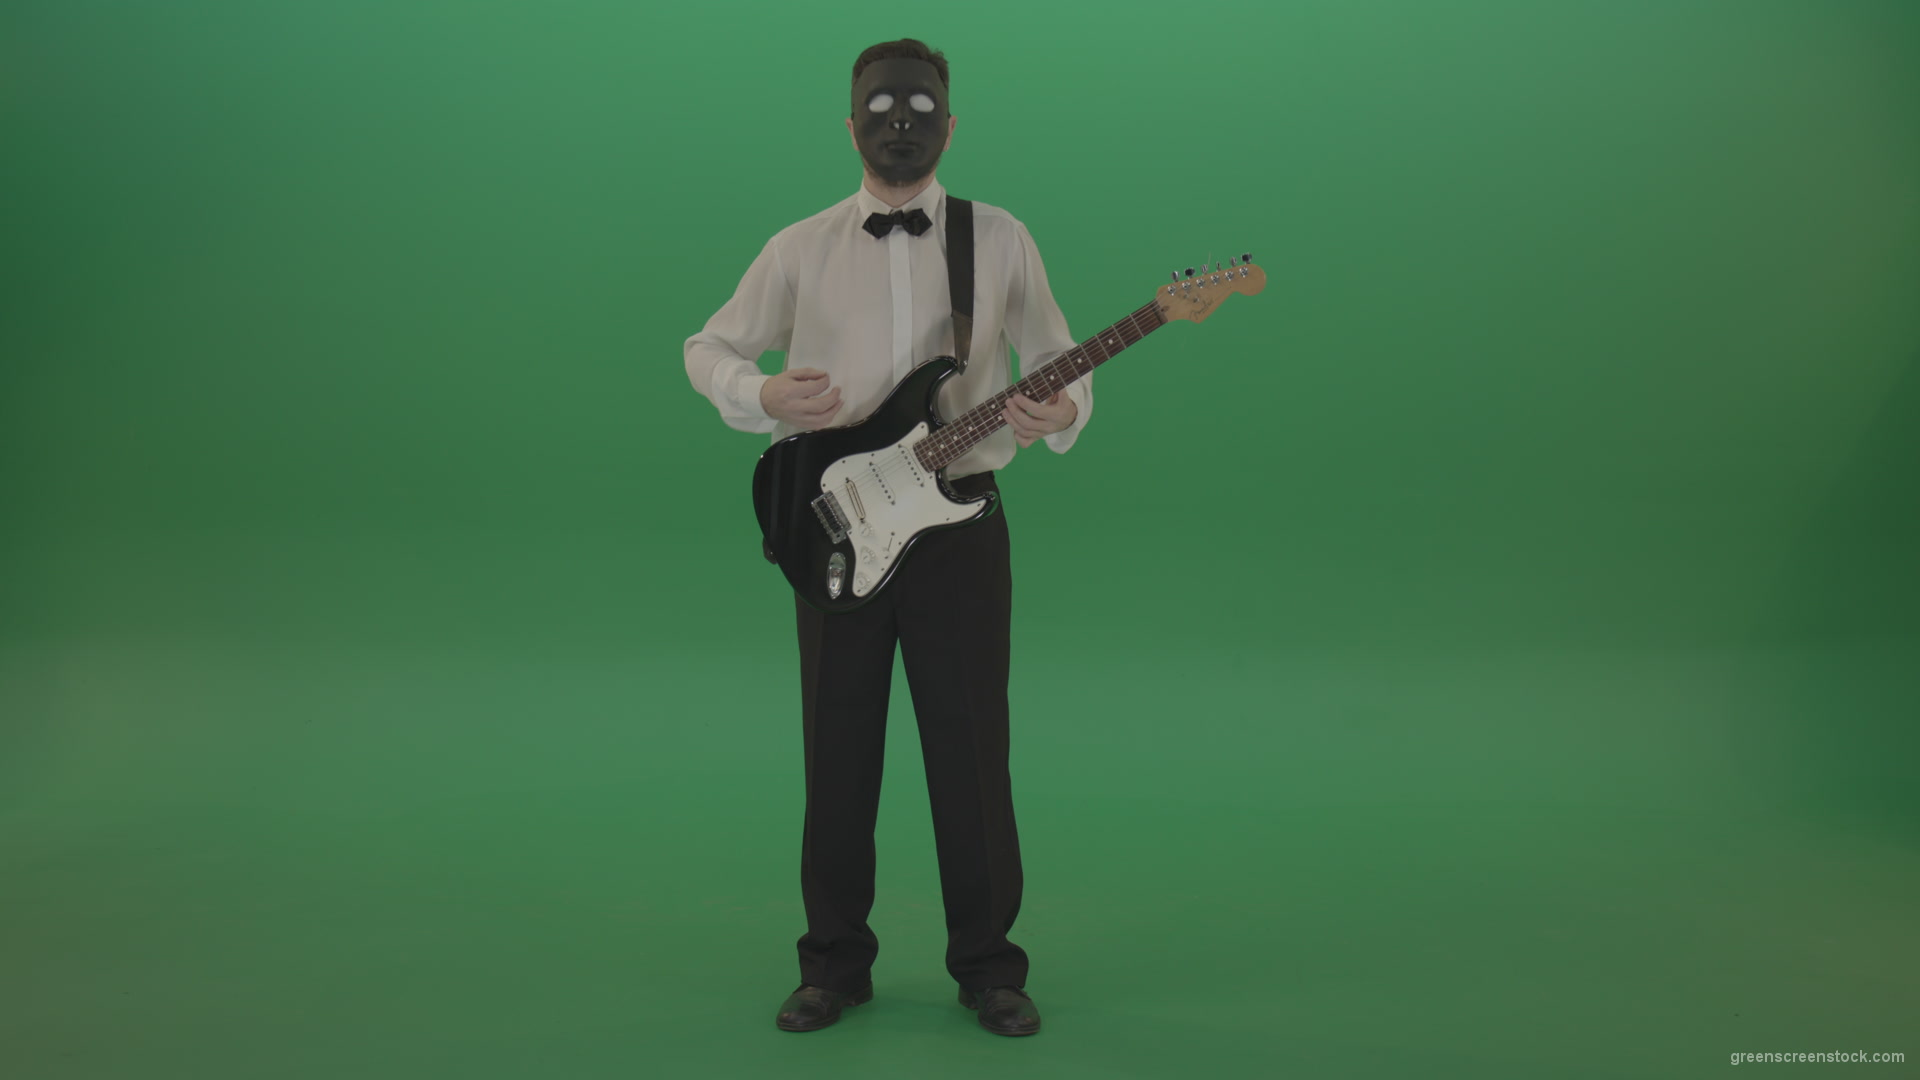 Classic-guitarist-in-white-shirt-play-guitar-in-mask-isolated-on-green-screen_009 Green Screen Stock